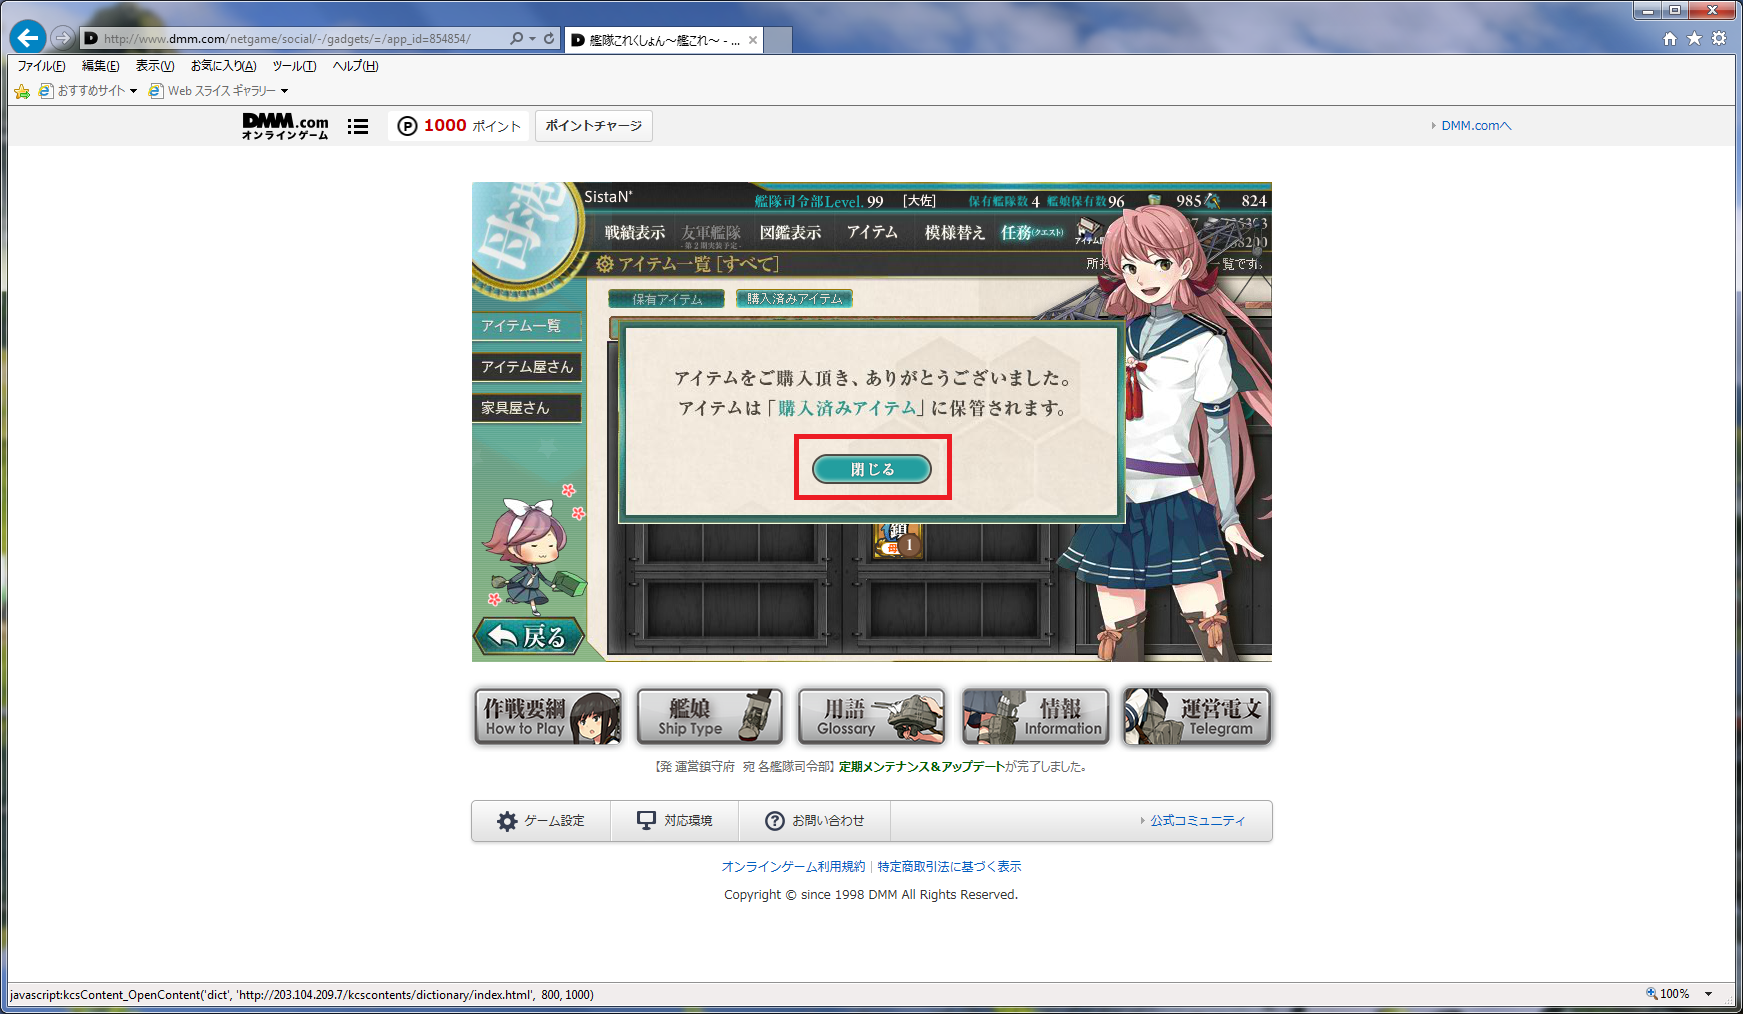 how_to_buy_kancolle_item-2.png